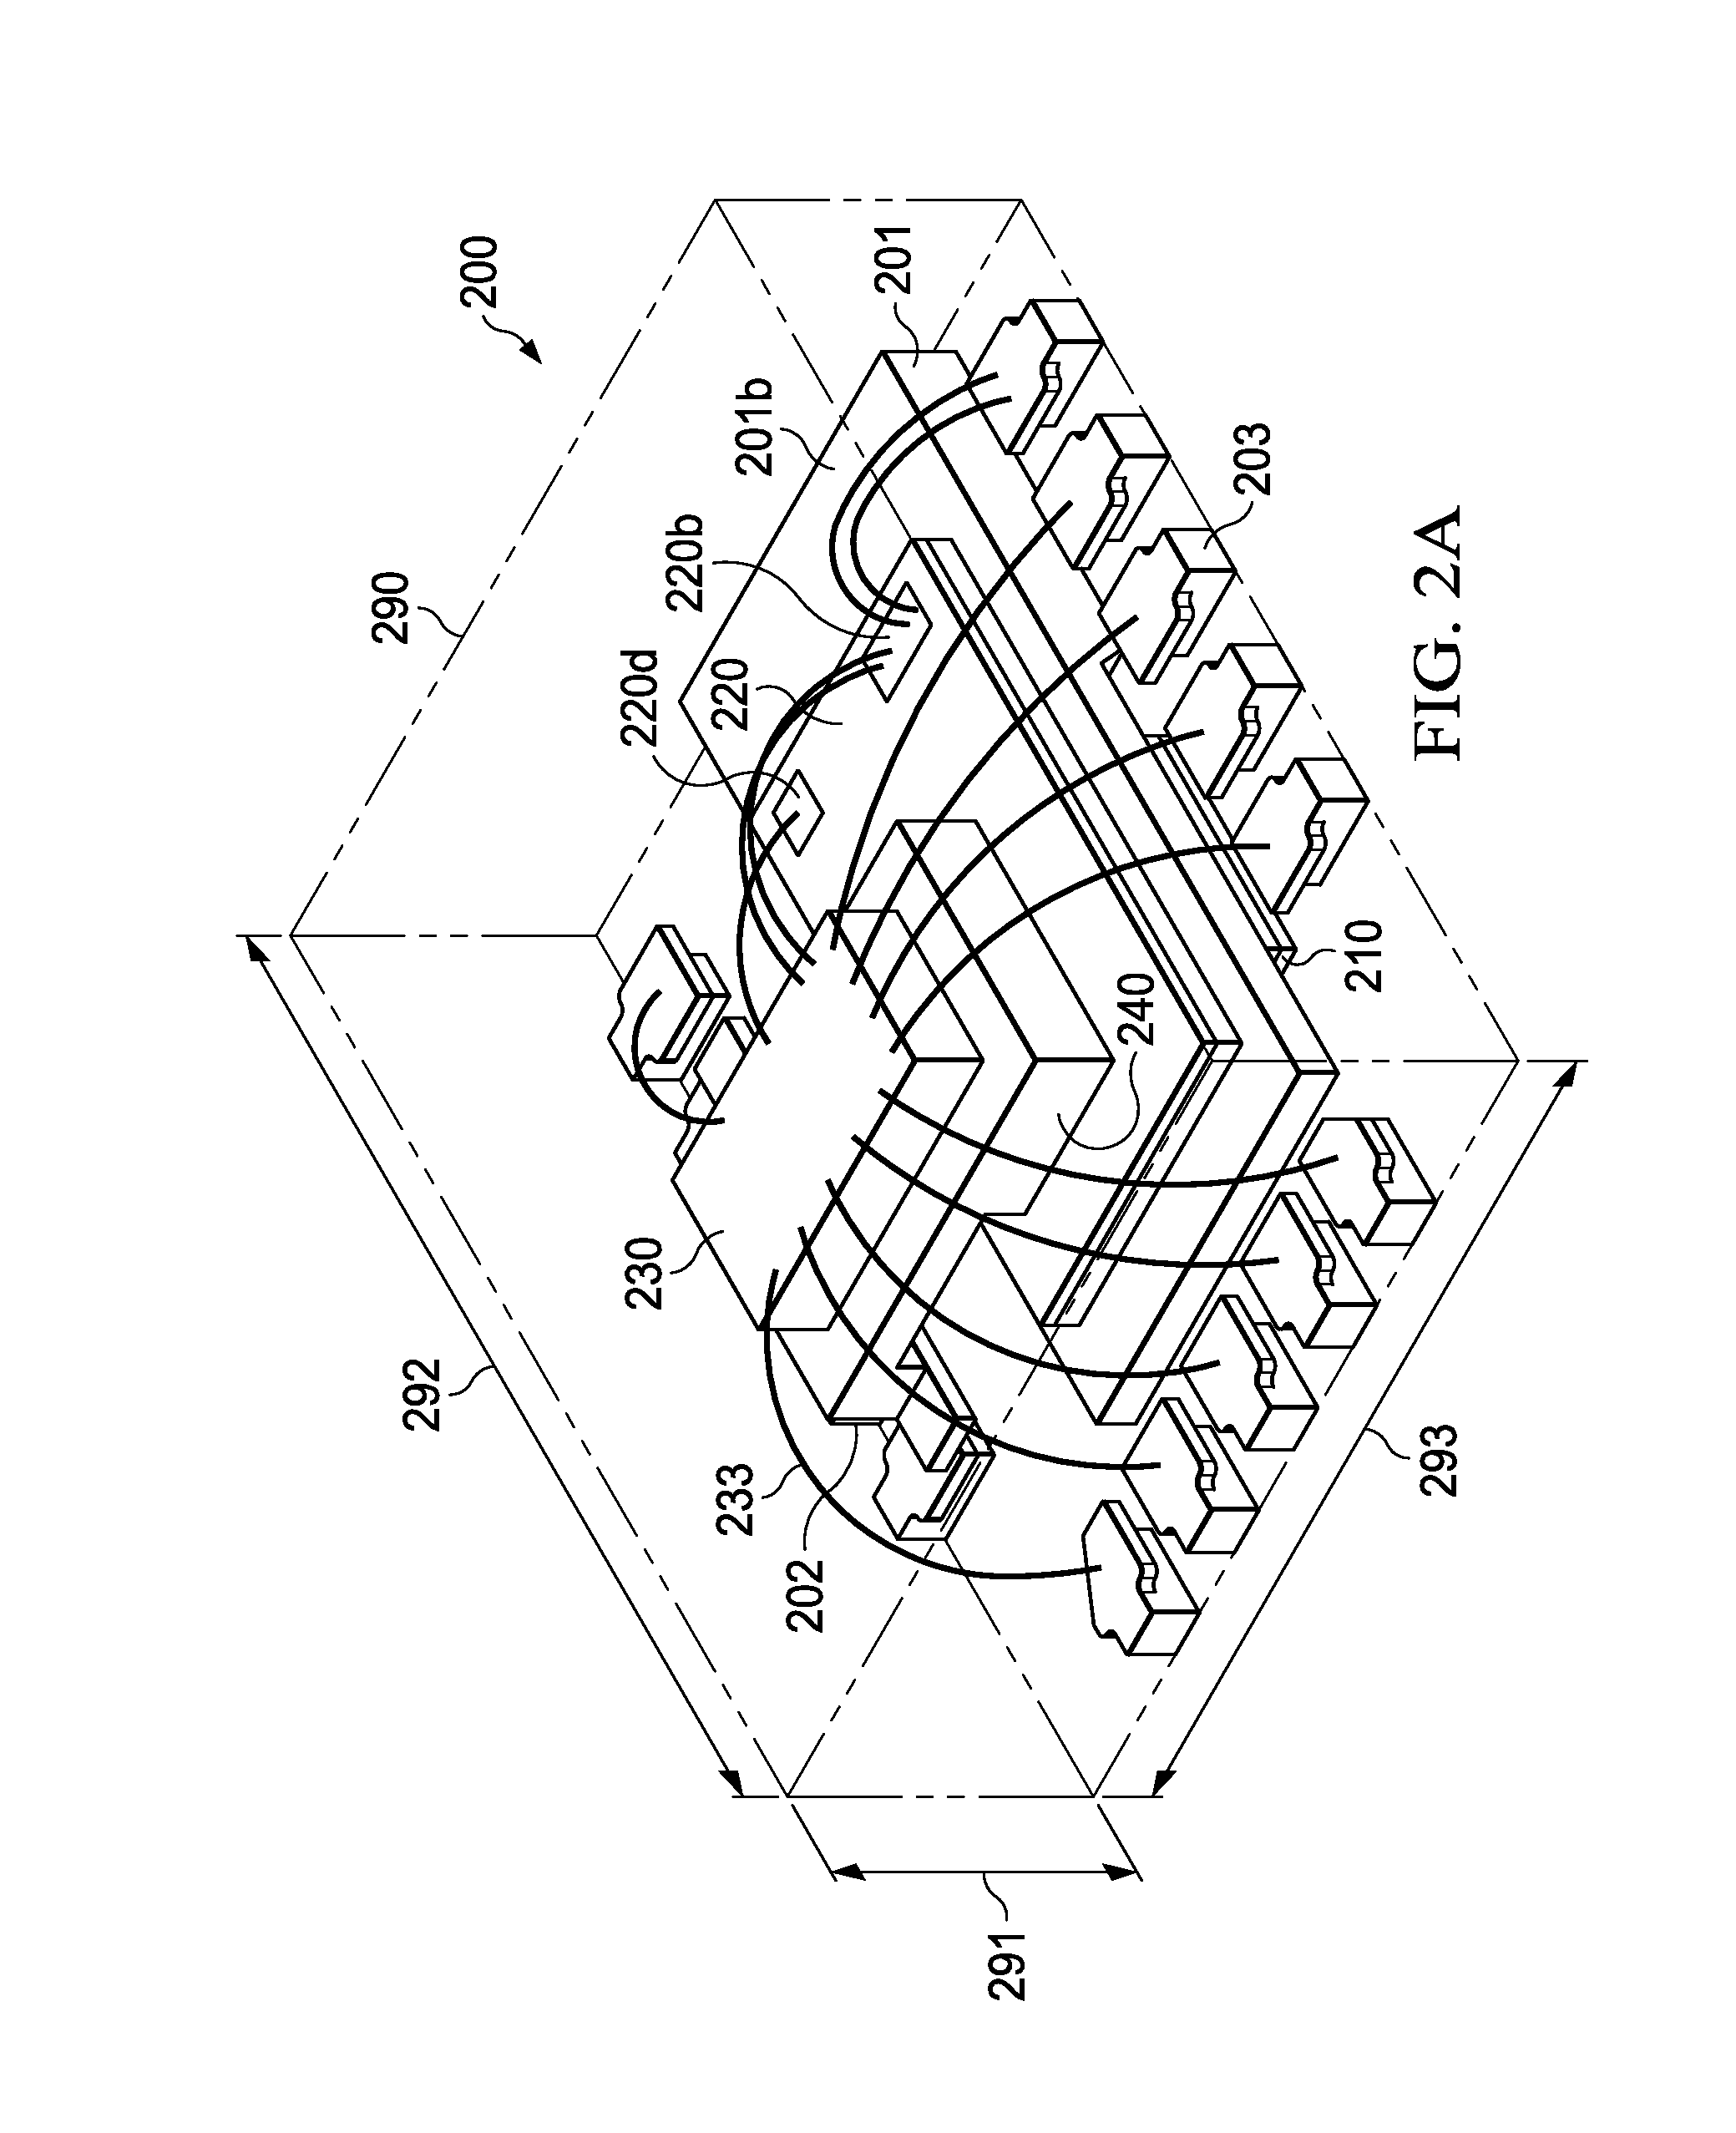 Stacked synchronous buck converter having chip embedded in outside recess of leadframe